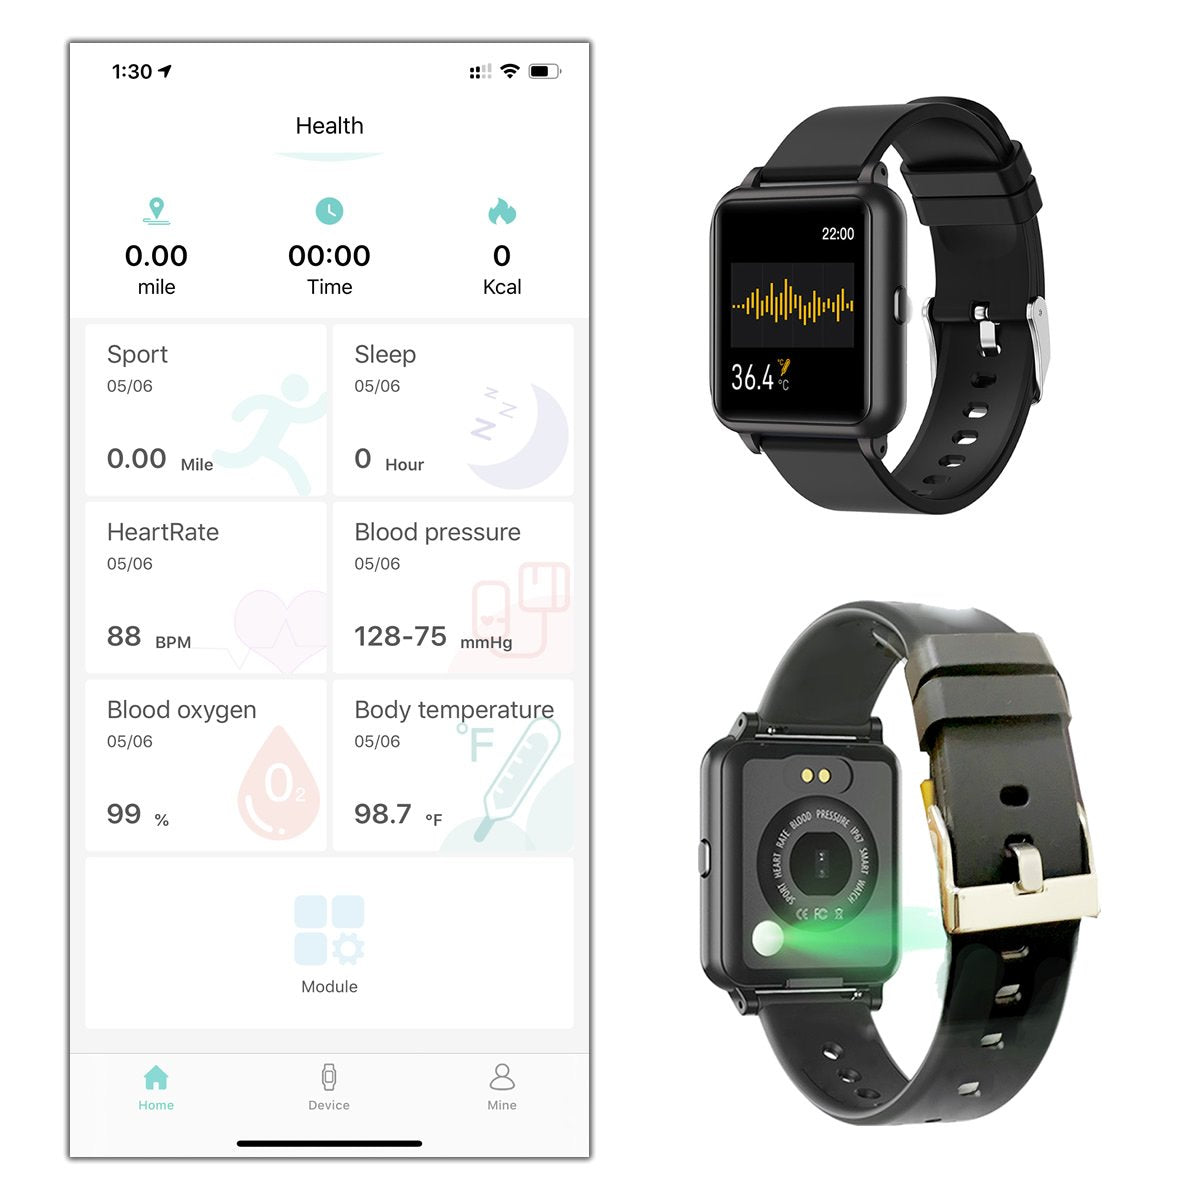 OXITEMP Smart Watch With Live Oximeter, Thermometer And Pulse Monitor